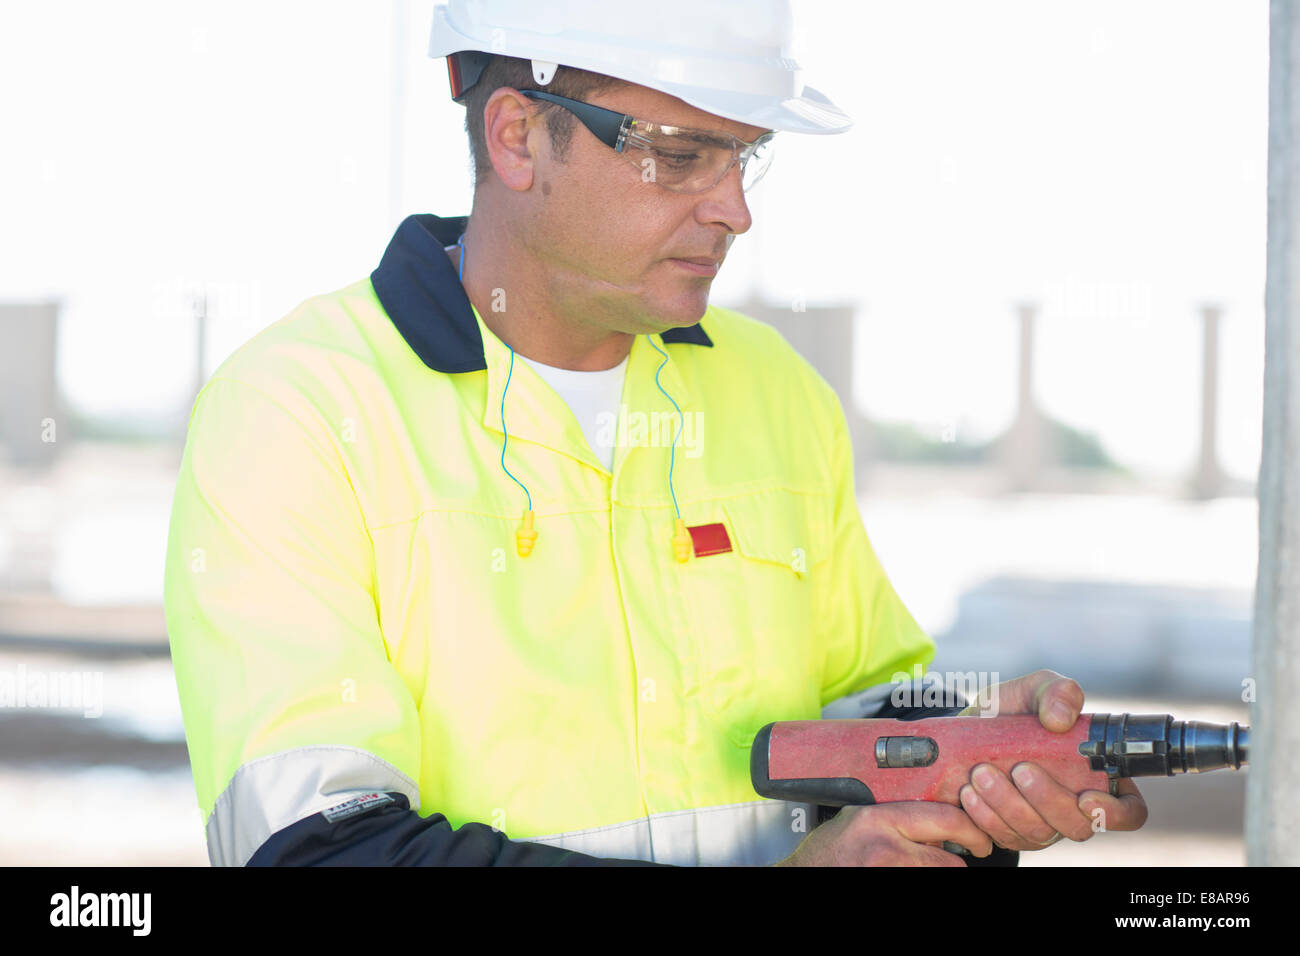 Builder using electric drill on construction site Stock Photo